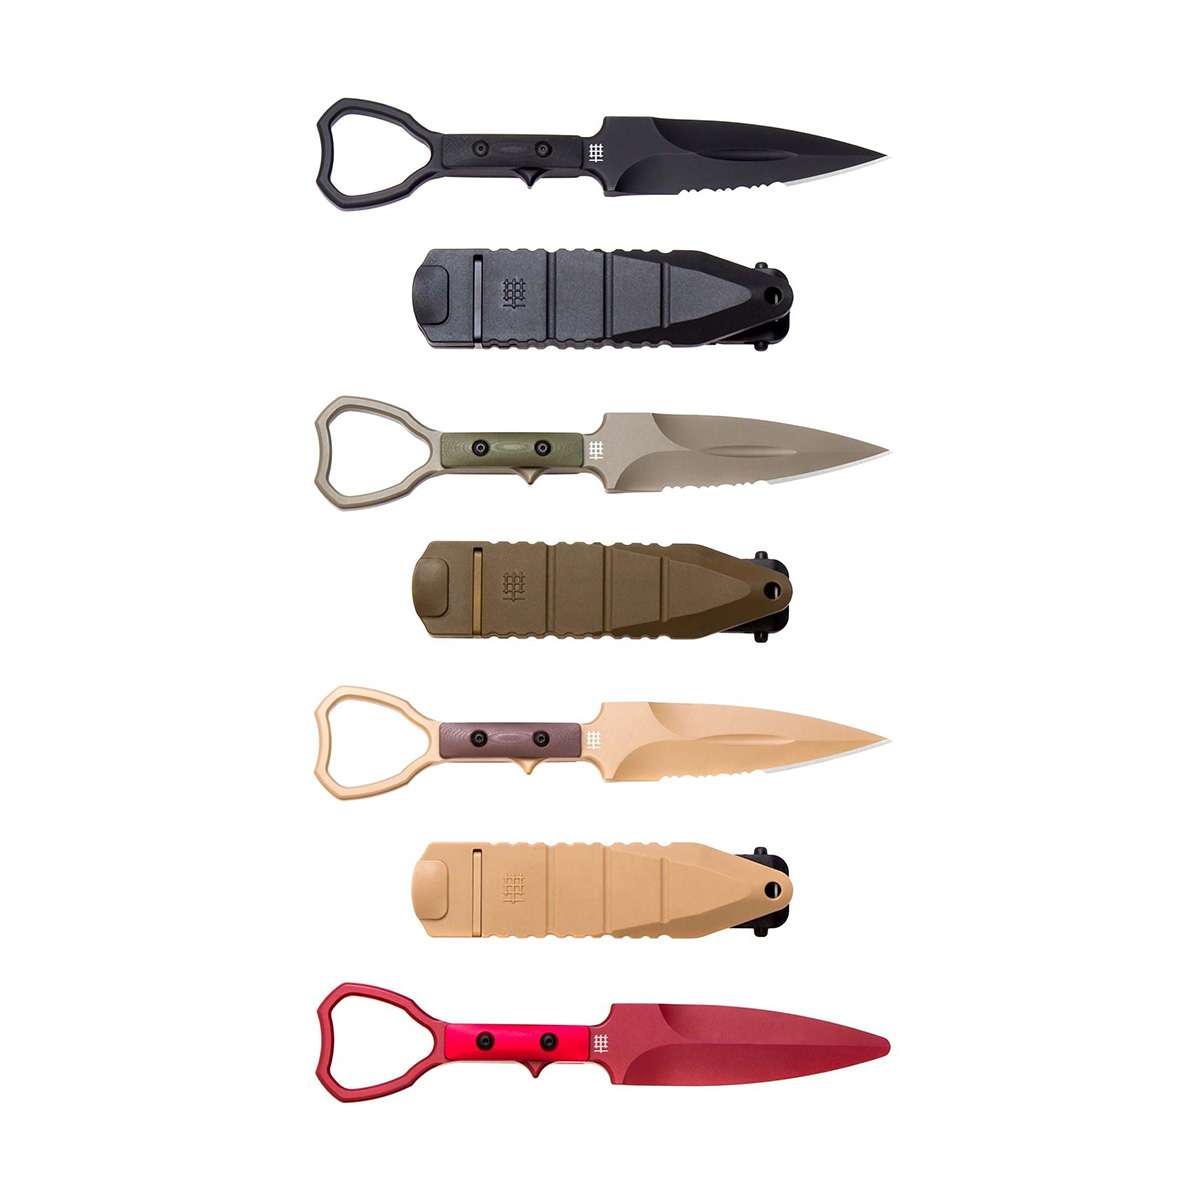 Halfbreed CCK-01 Compact Clearance Knife & Trainer Bundle